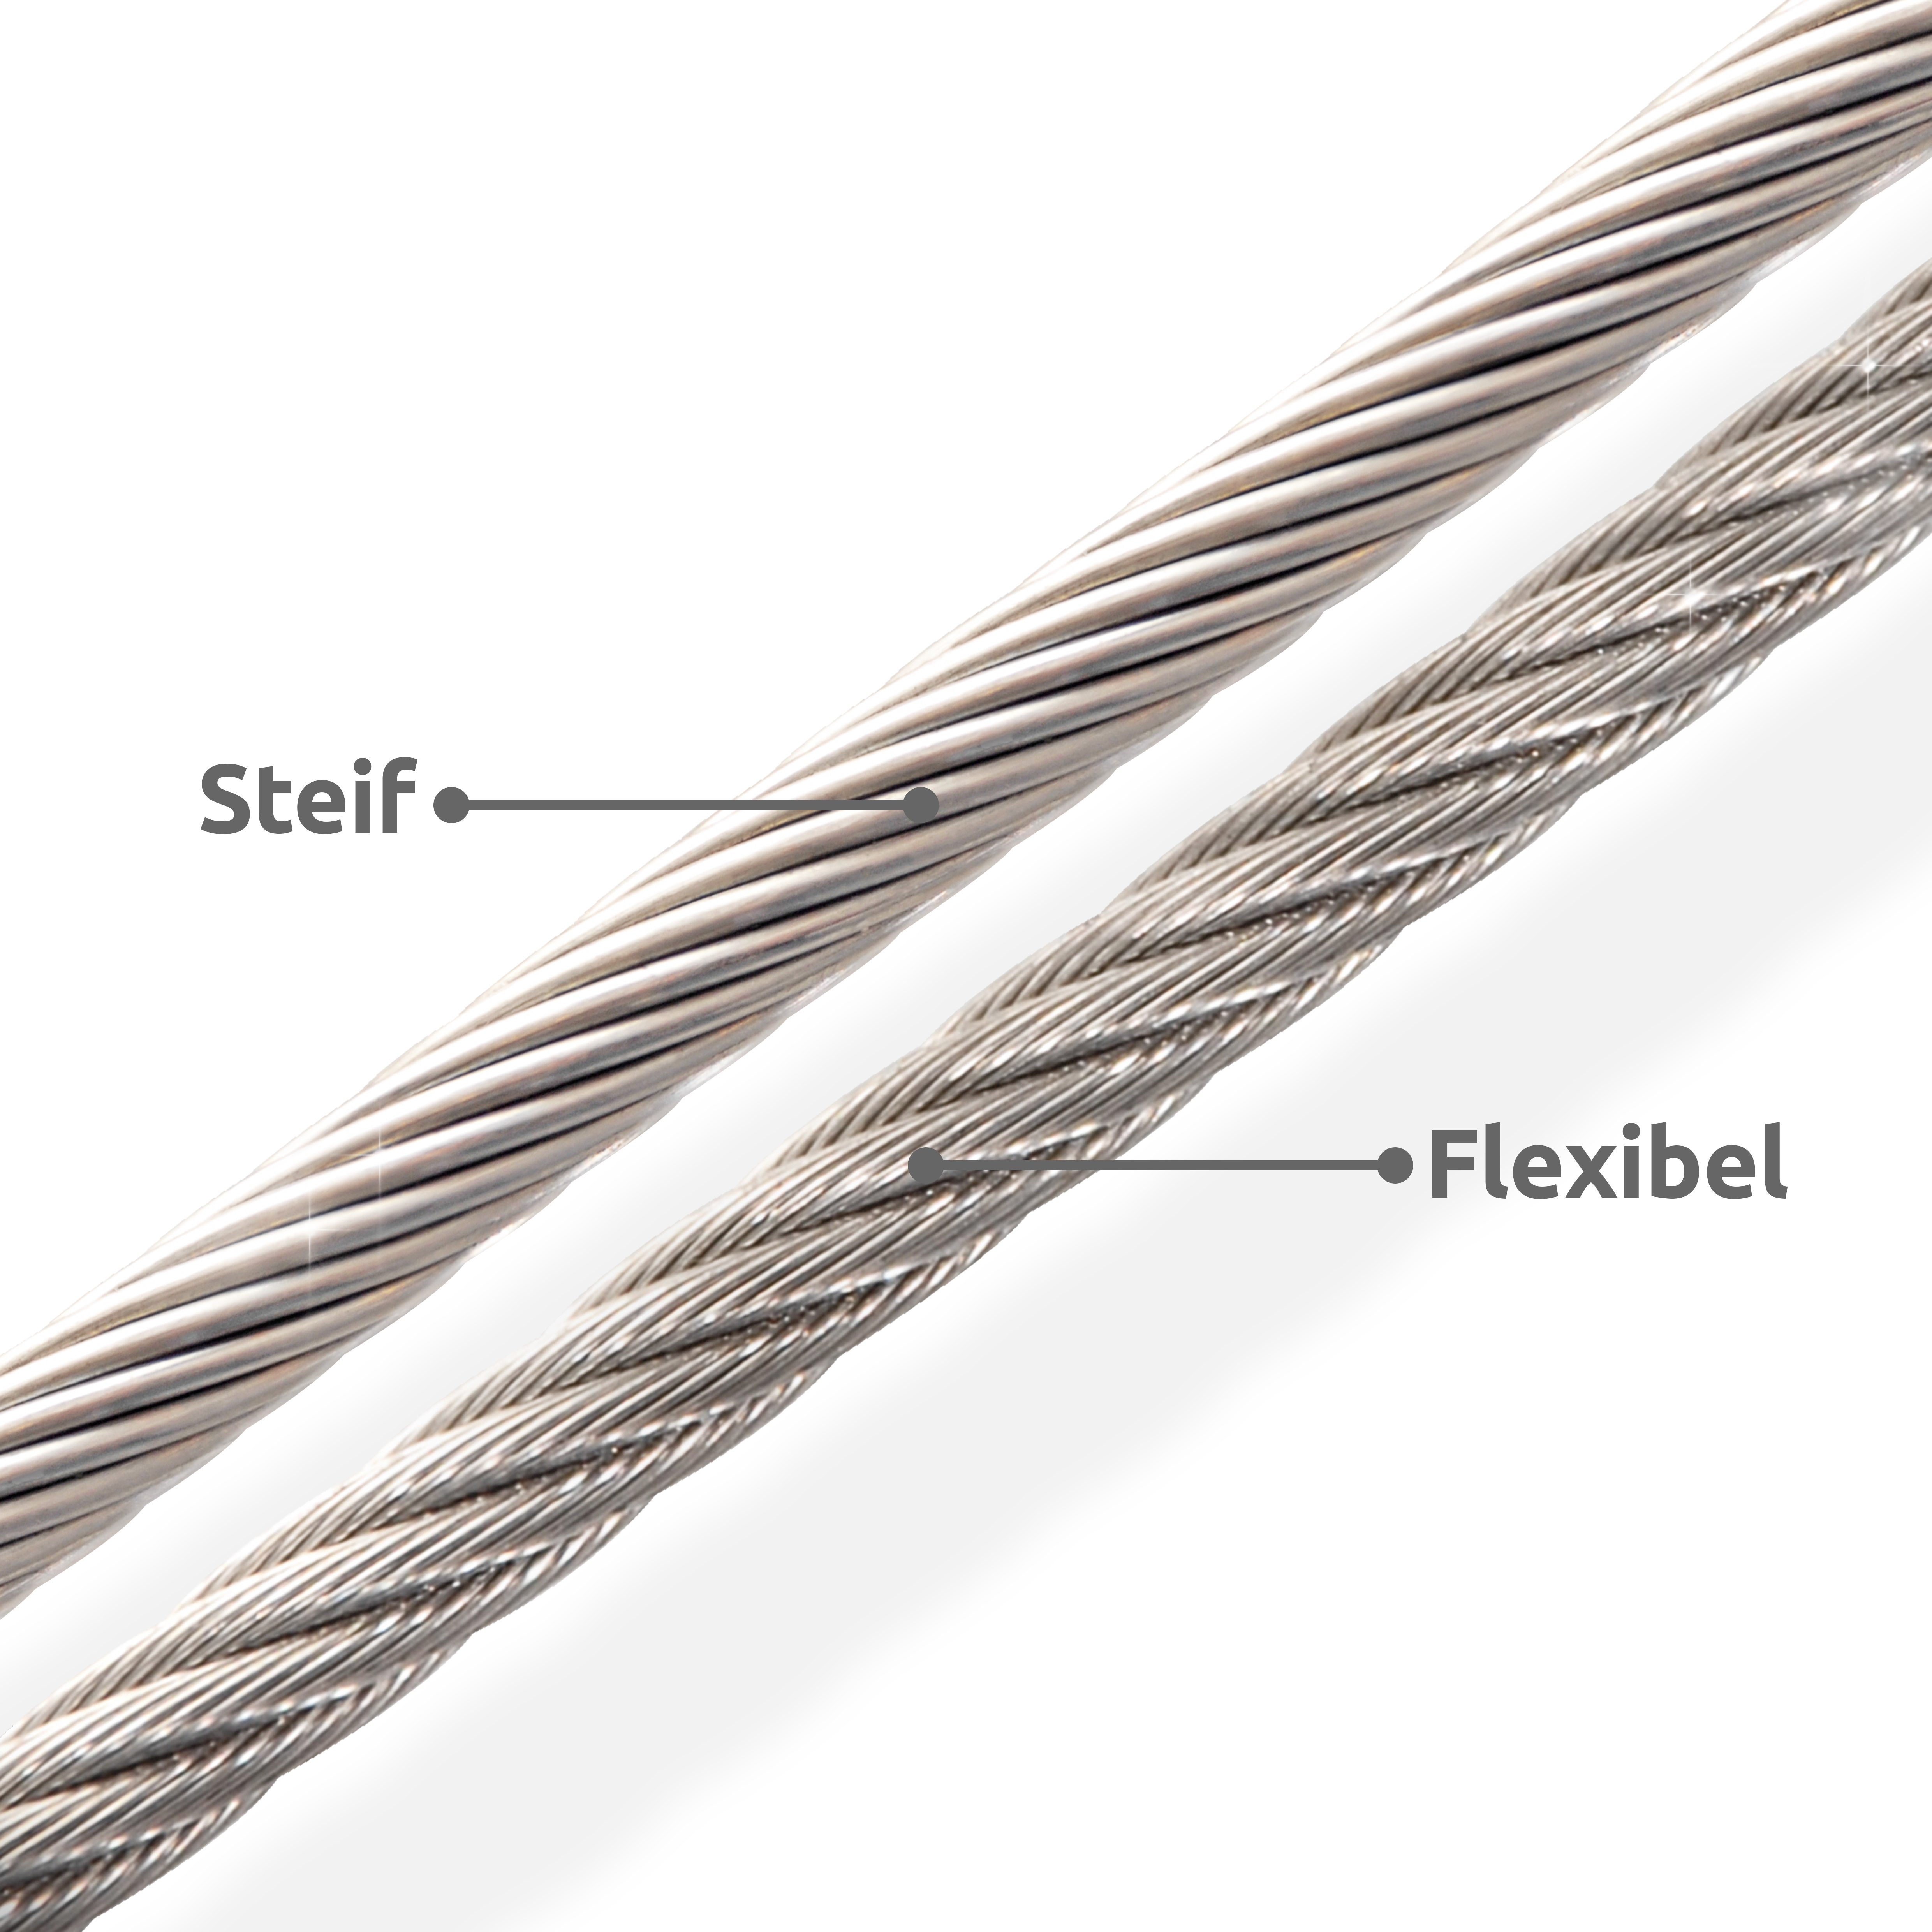 7x7 STAINLESS STEEL CABLE wire rope V4A 1mm 1.5mm 2mm 2.5mm 3mm 4mm 5mm 6mm 8mm 